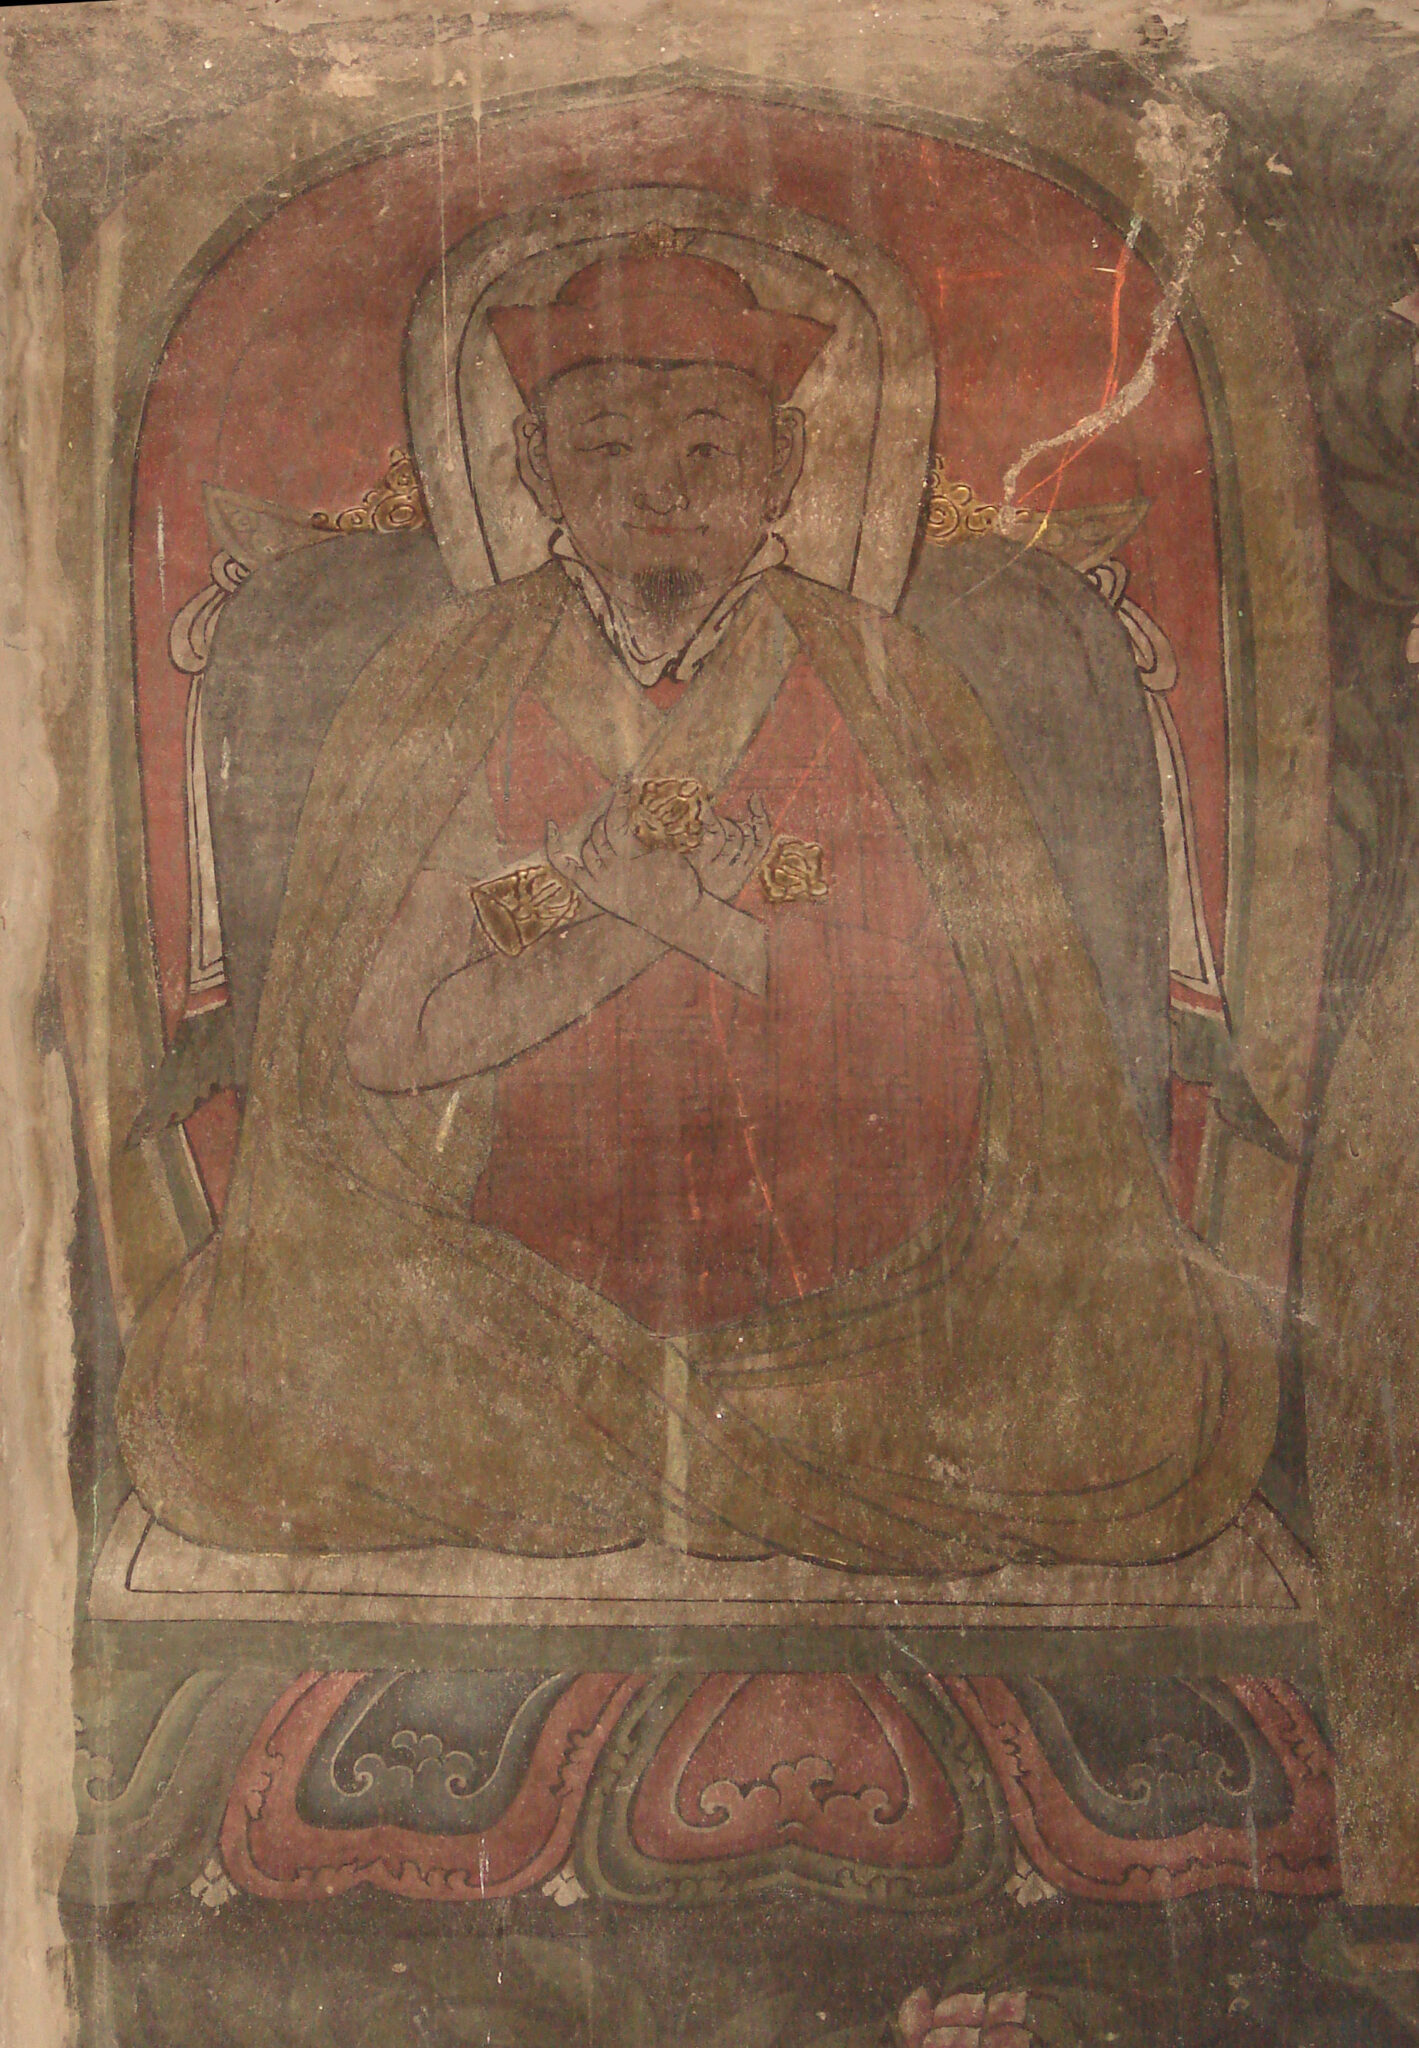 Detail of mural featuring yellow-robed figure crossing hands holding vajras at chest, seated on lotus